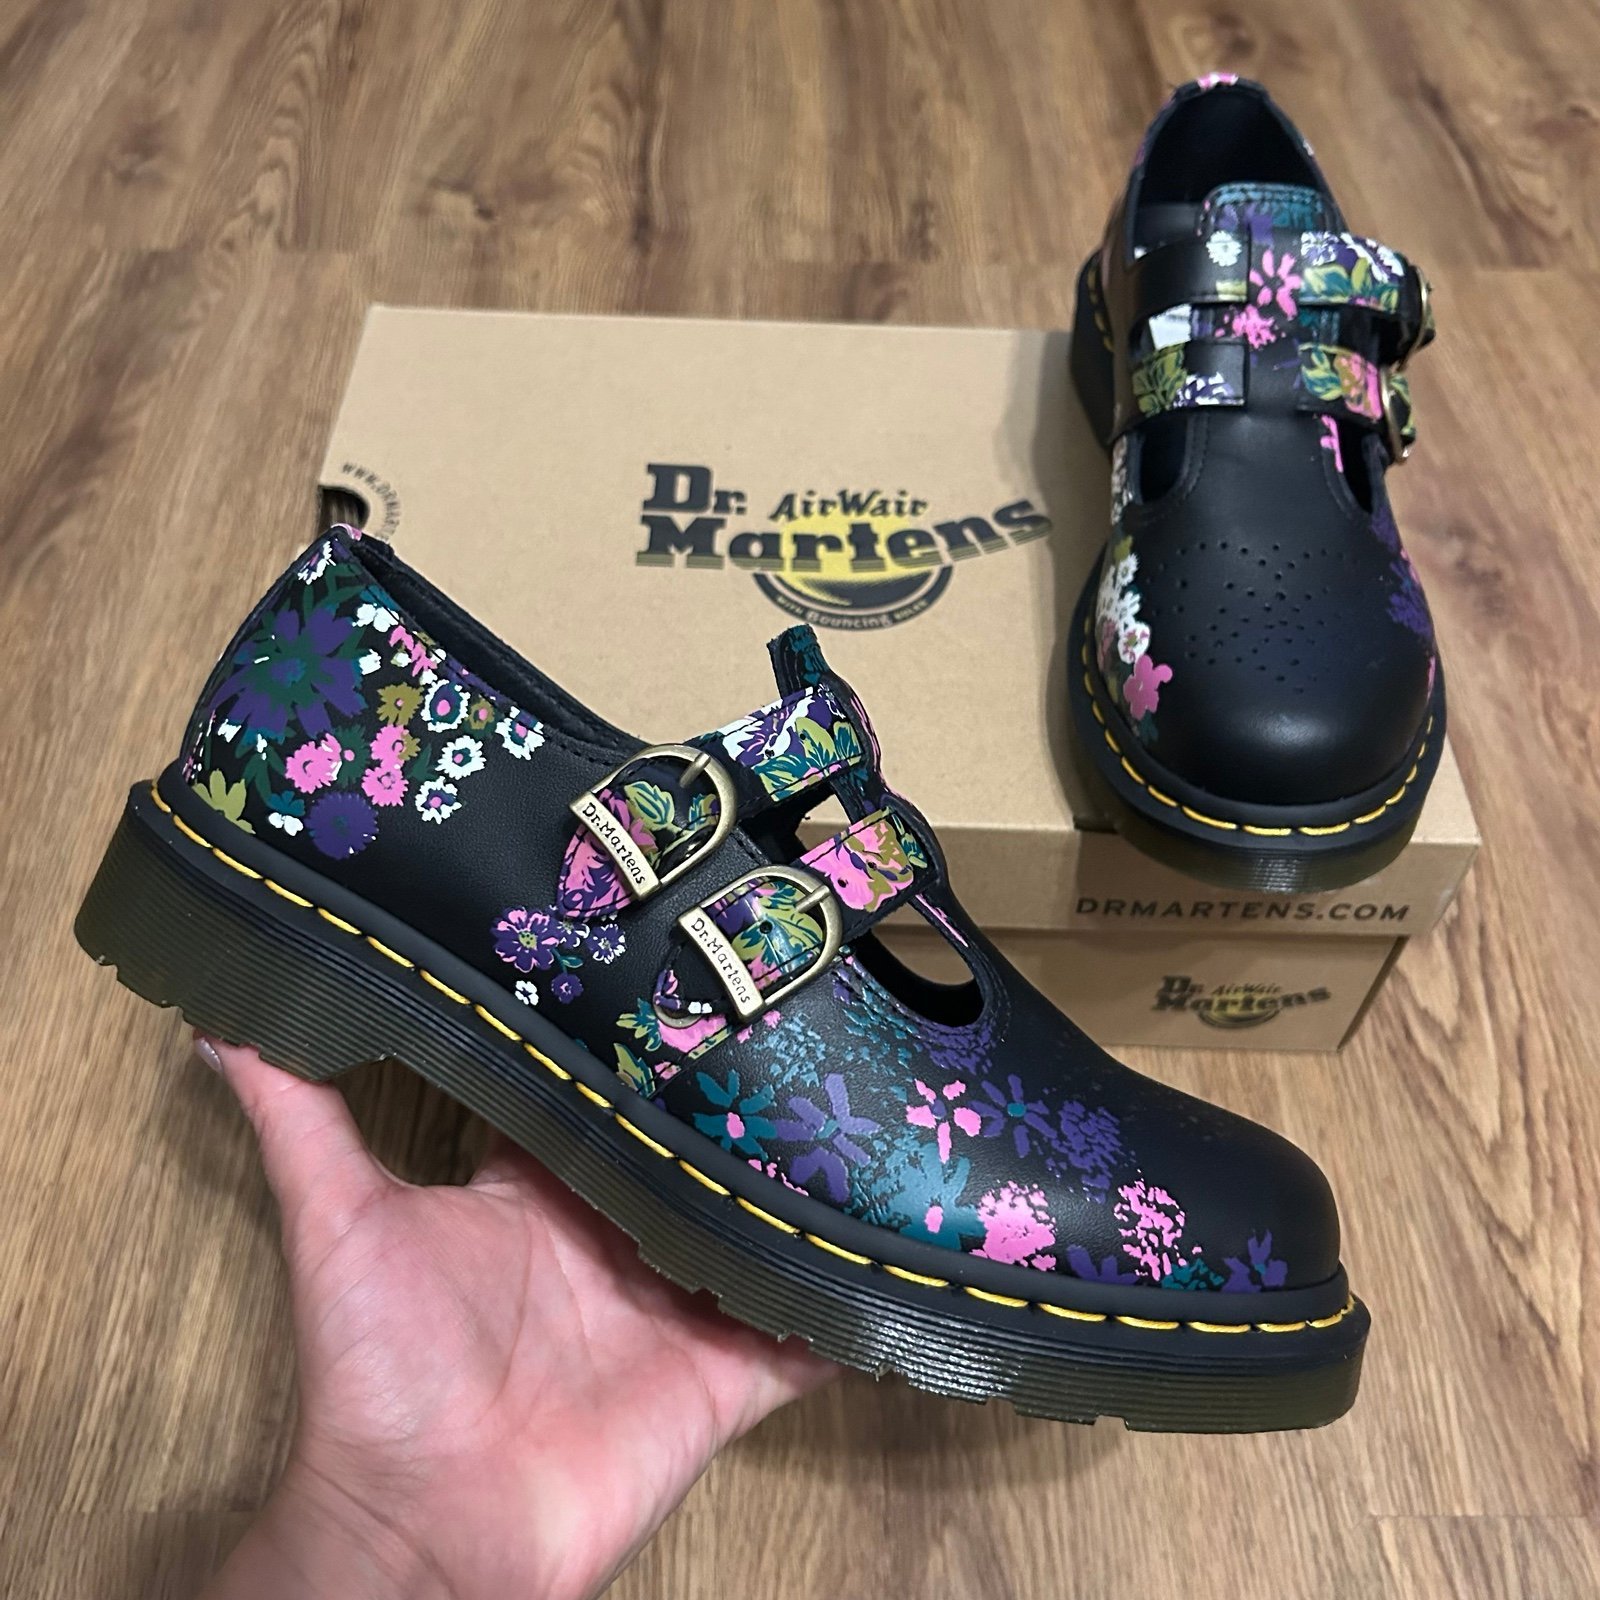 DR MARTENS Mary Jane floral print shoes women’s 8 new 3